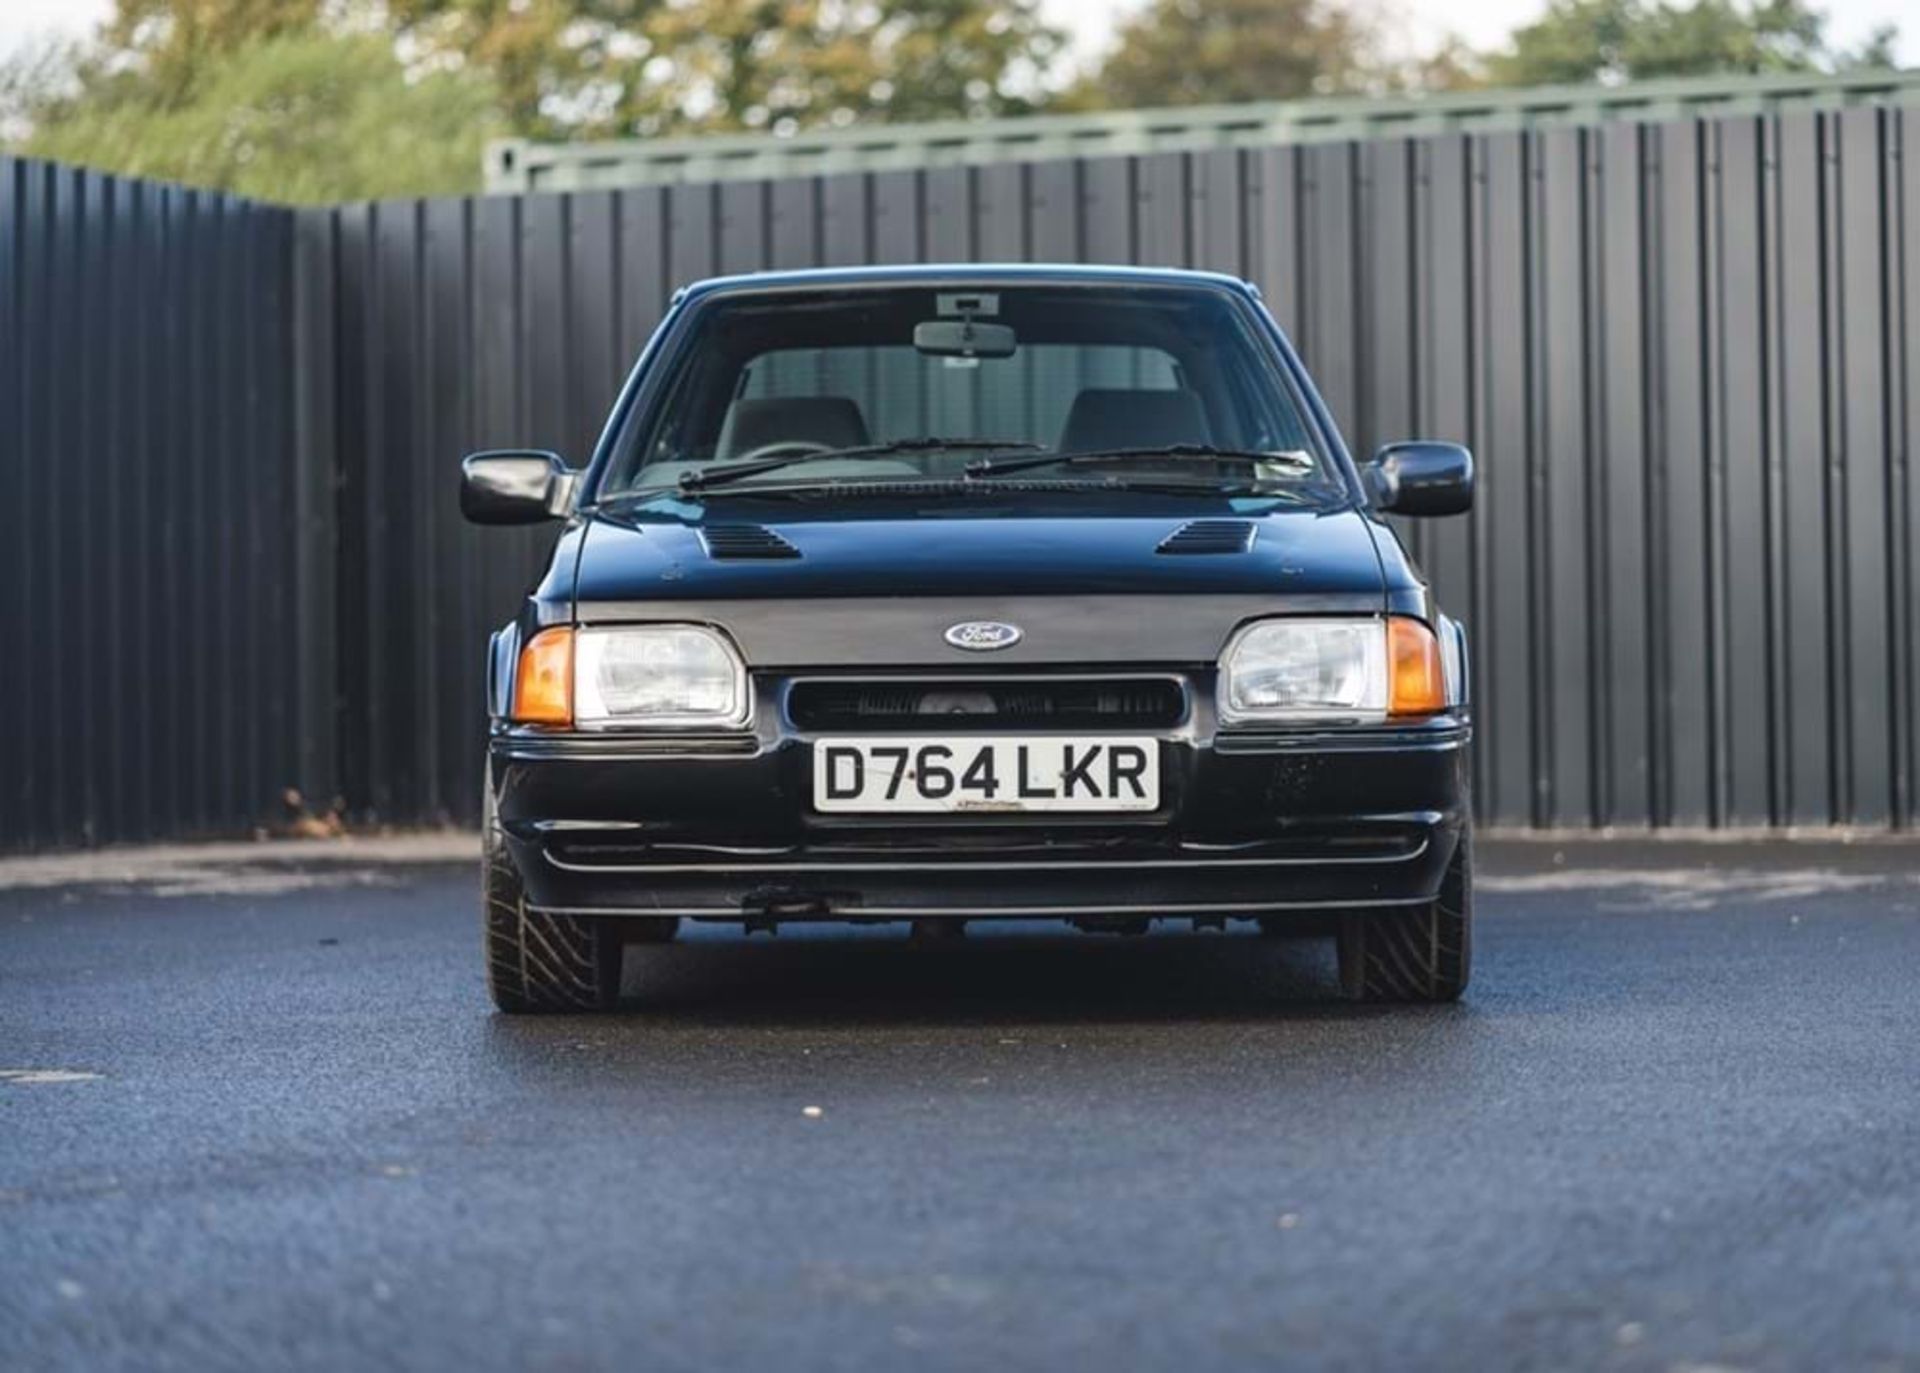 1986 Ford Escort RS Turbo - Image 7 of 10